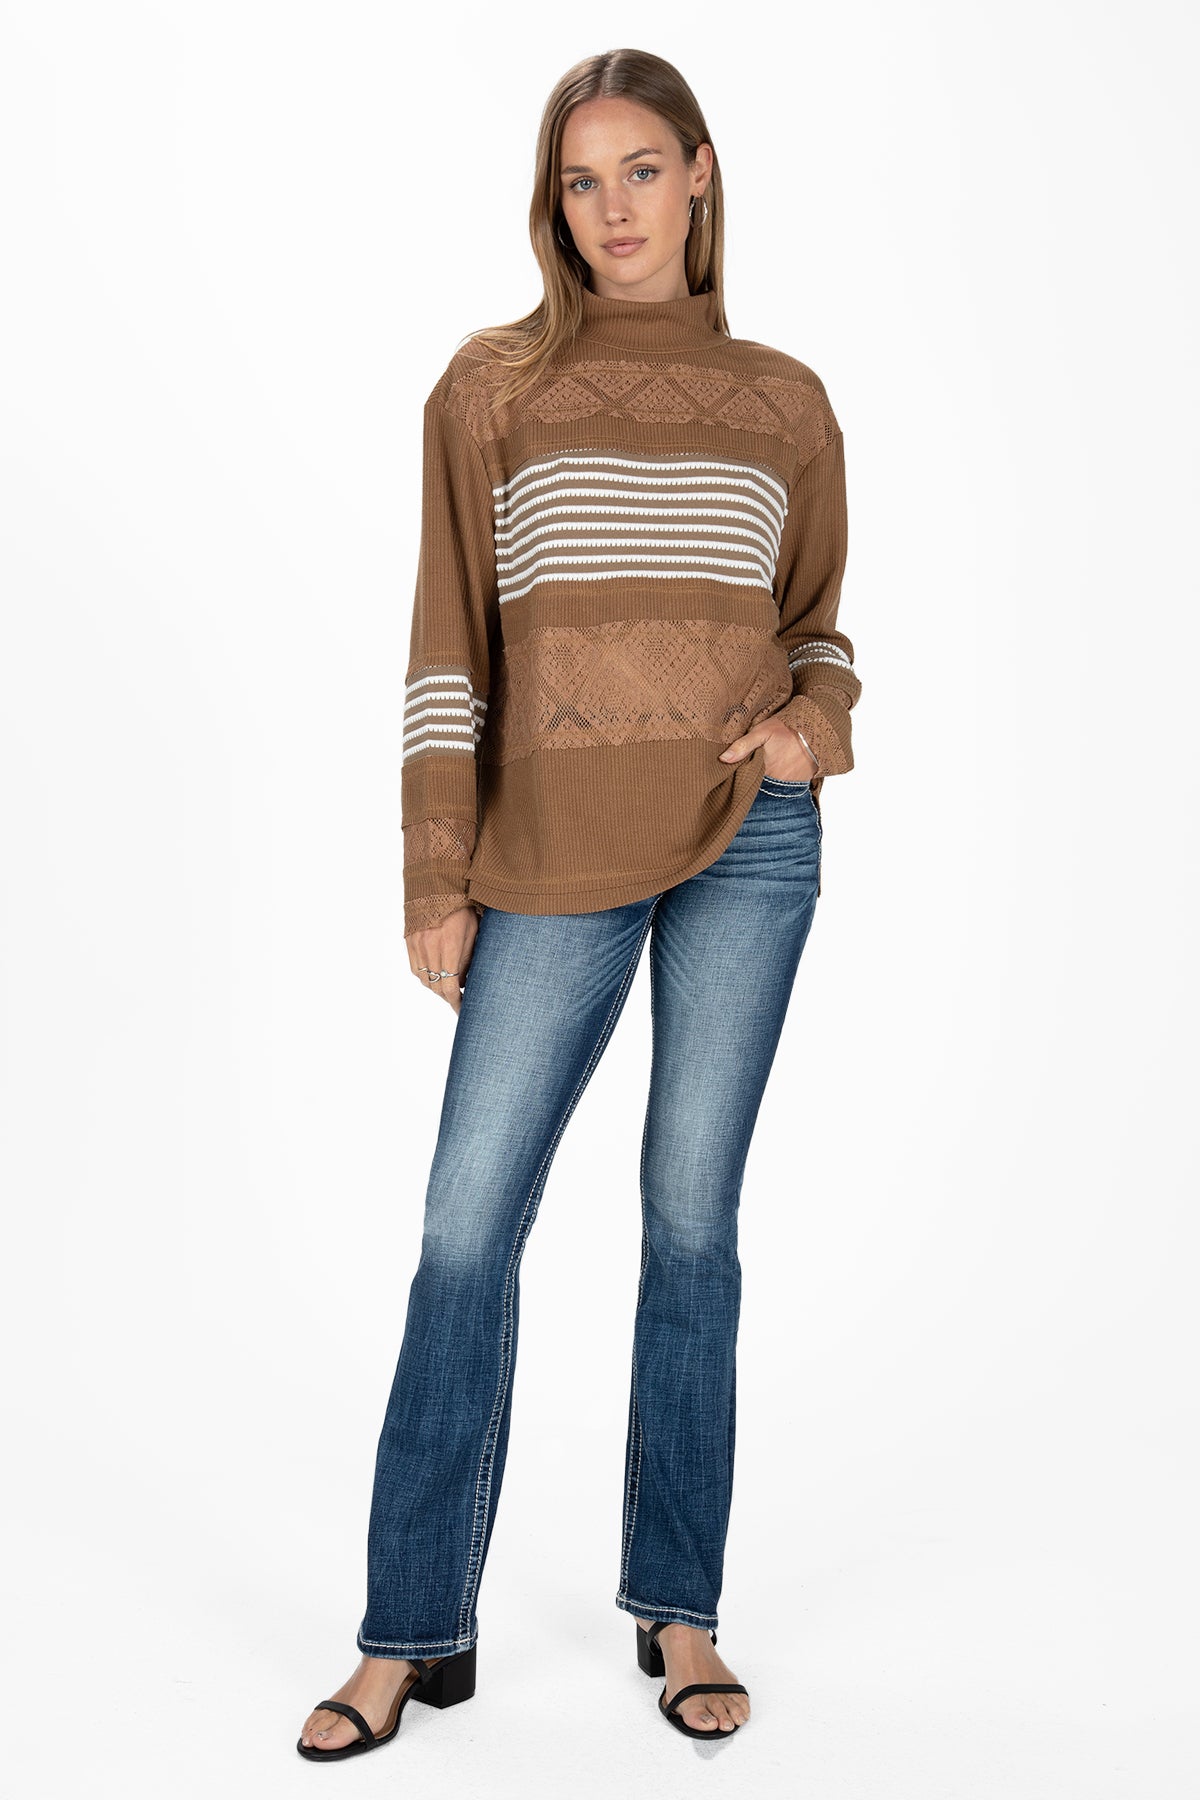 Lace & Stripes Long Sleeve Top